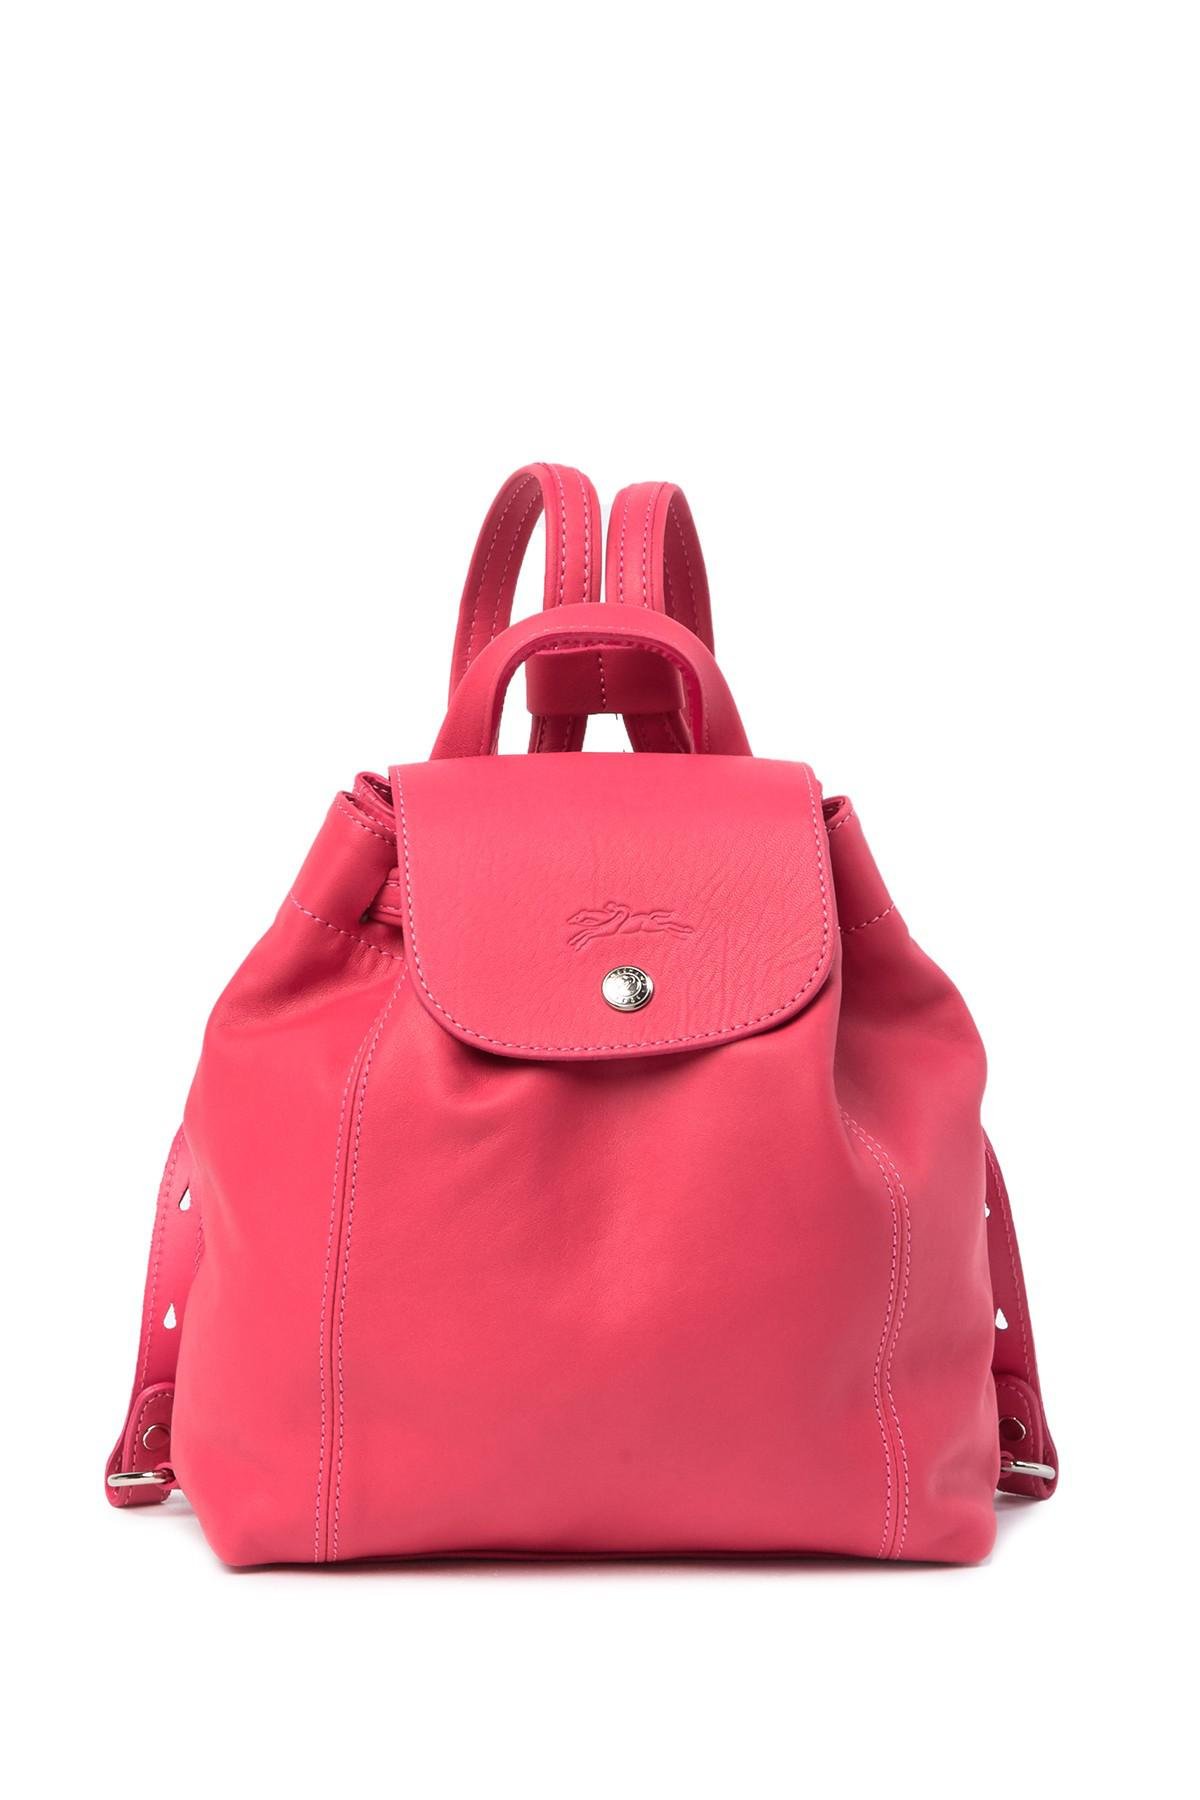 Longchamp Le Pliage Cuir Leather Backpack on SALE